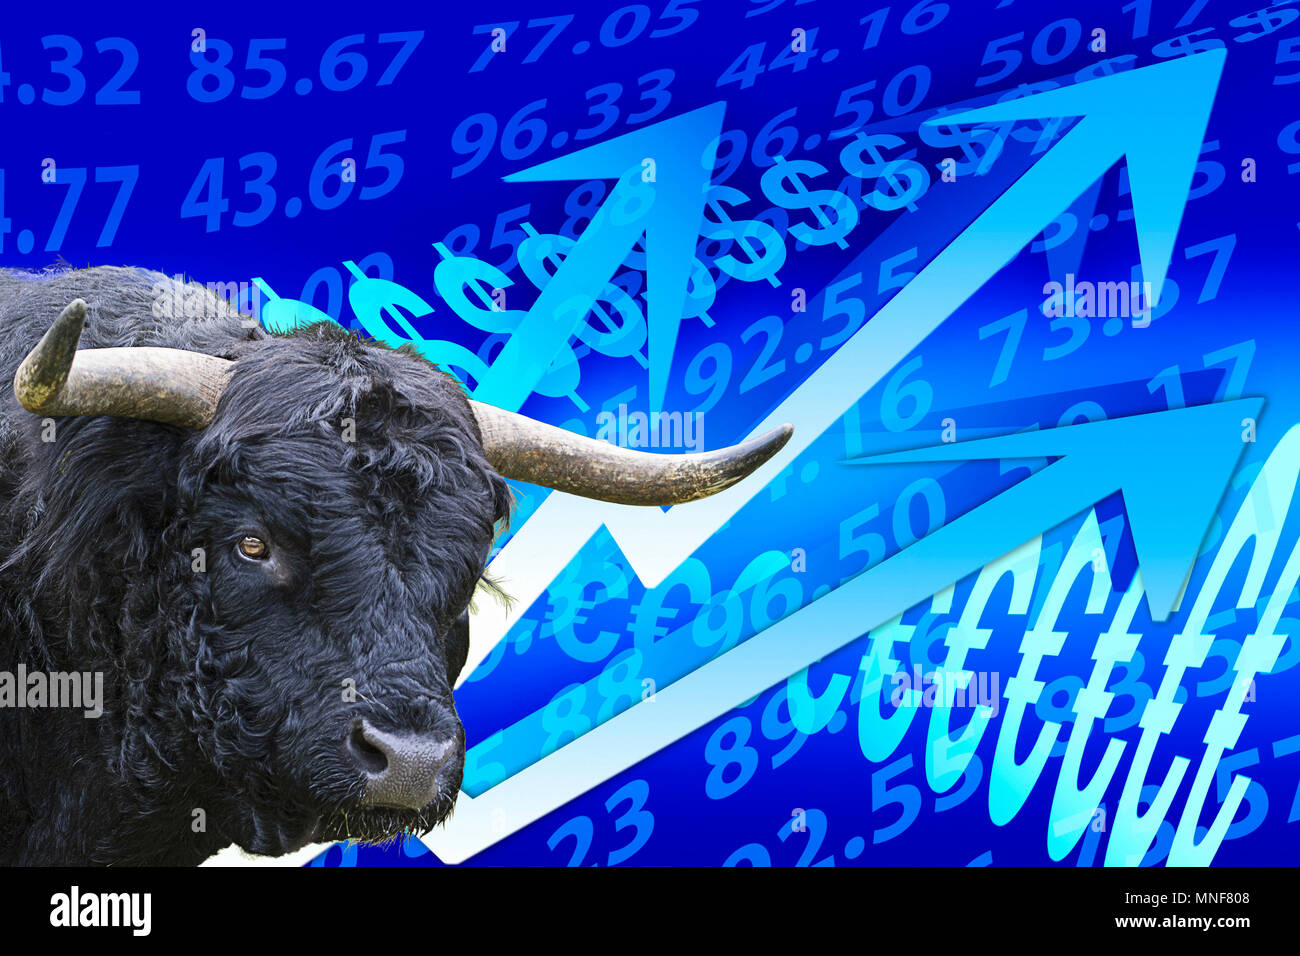 Bull, symbolic picture of rising prices, stock market figures, rising arrows, money growth, stock trading Stock Photo